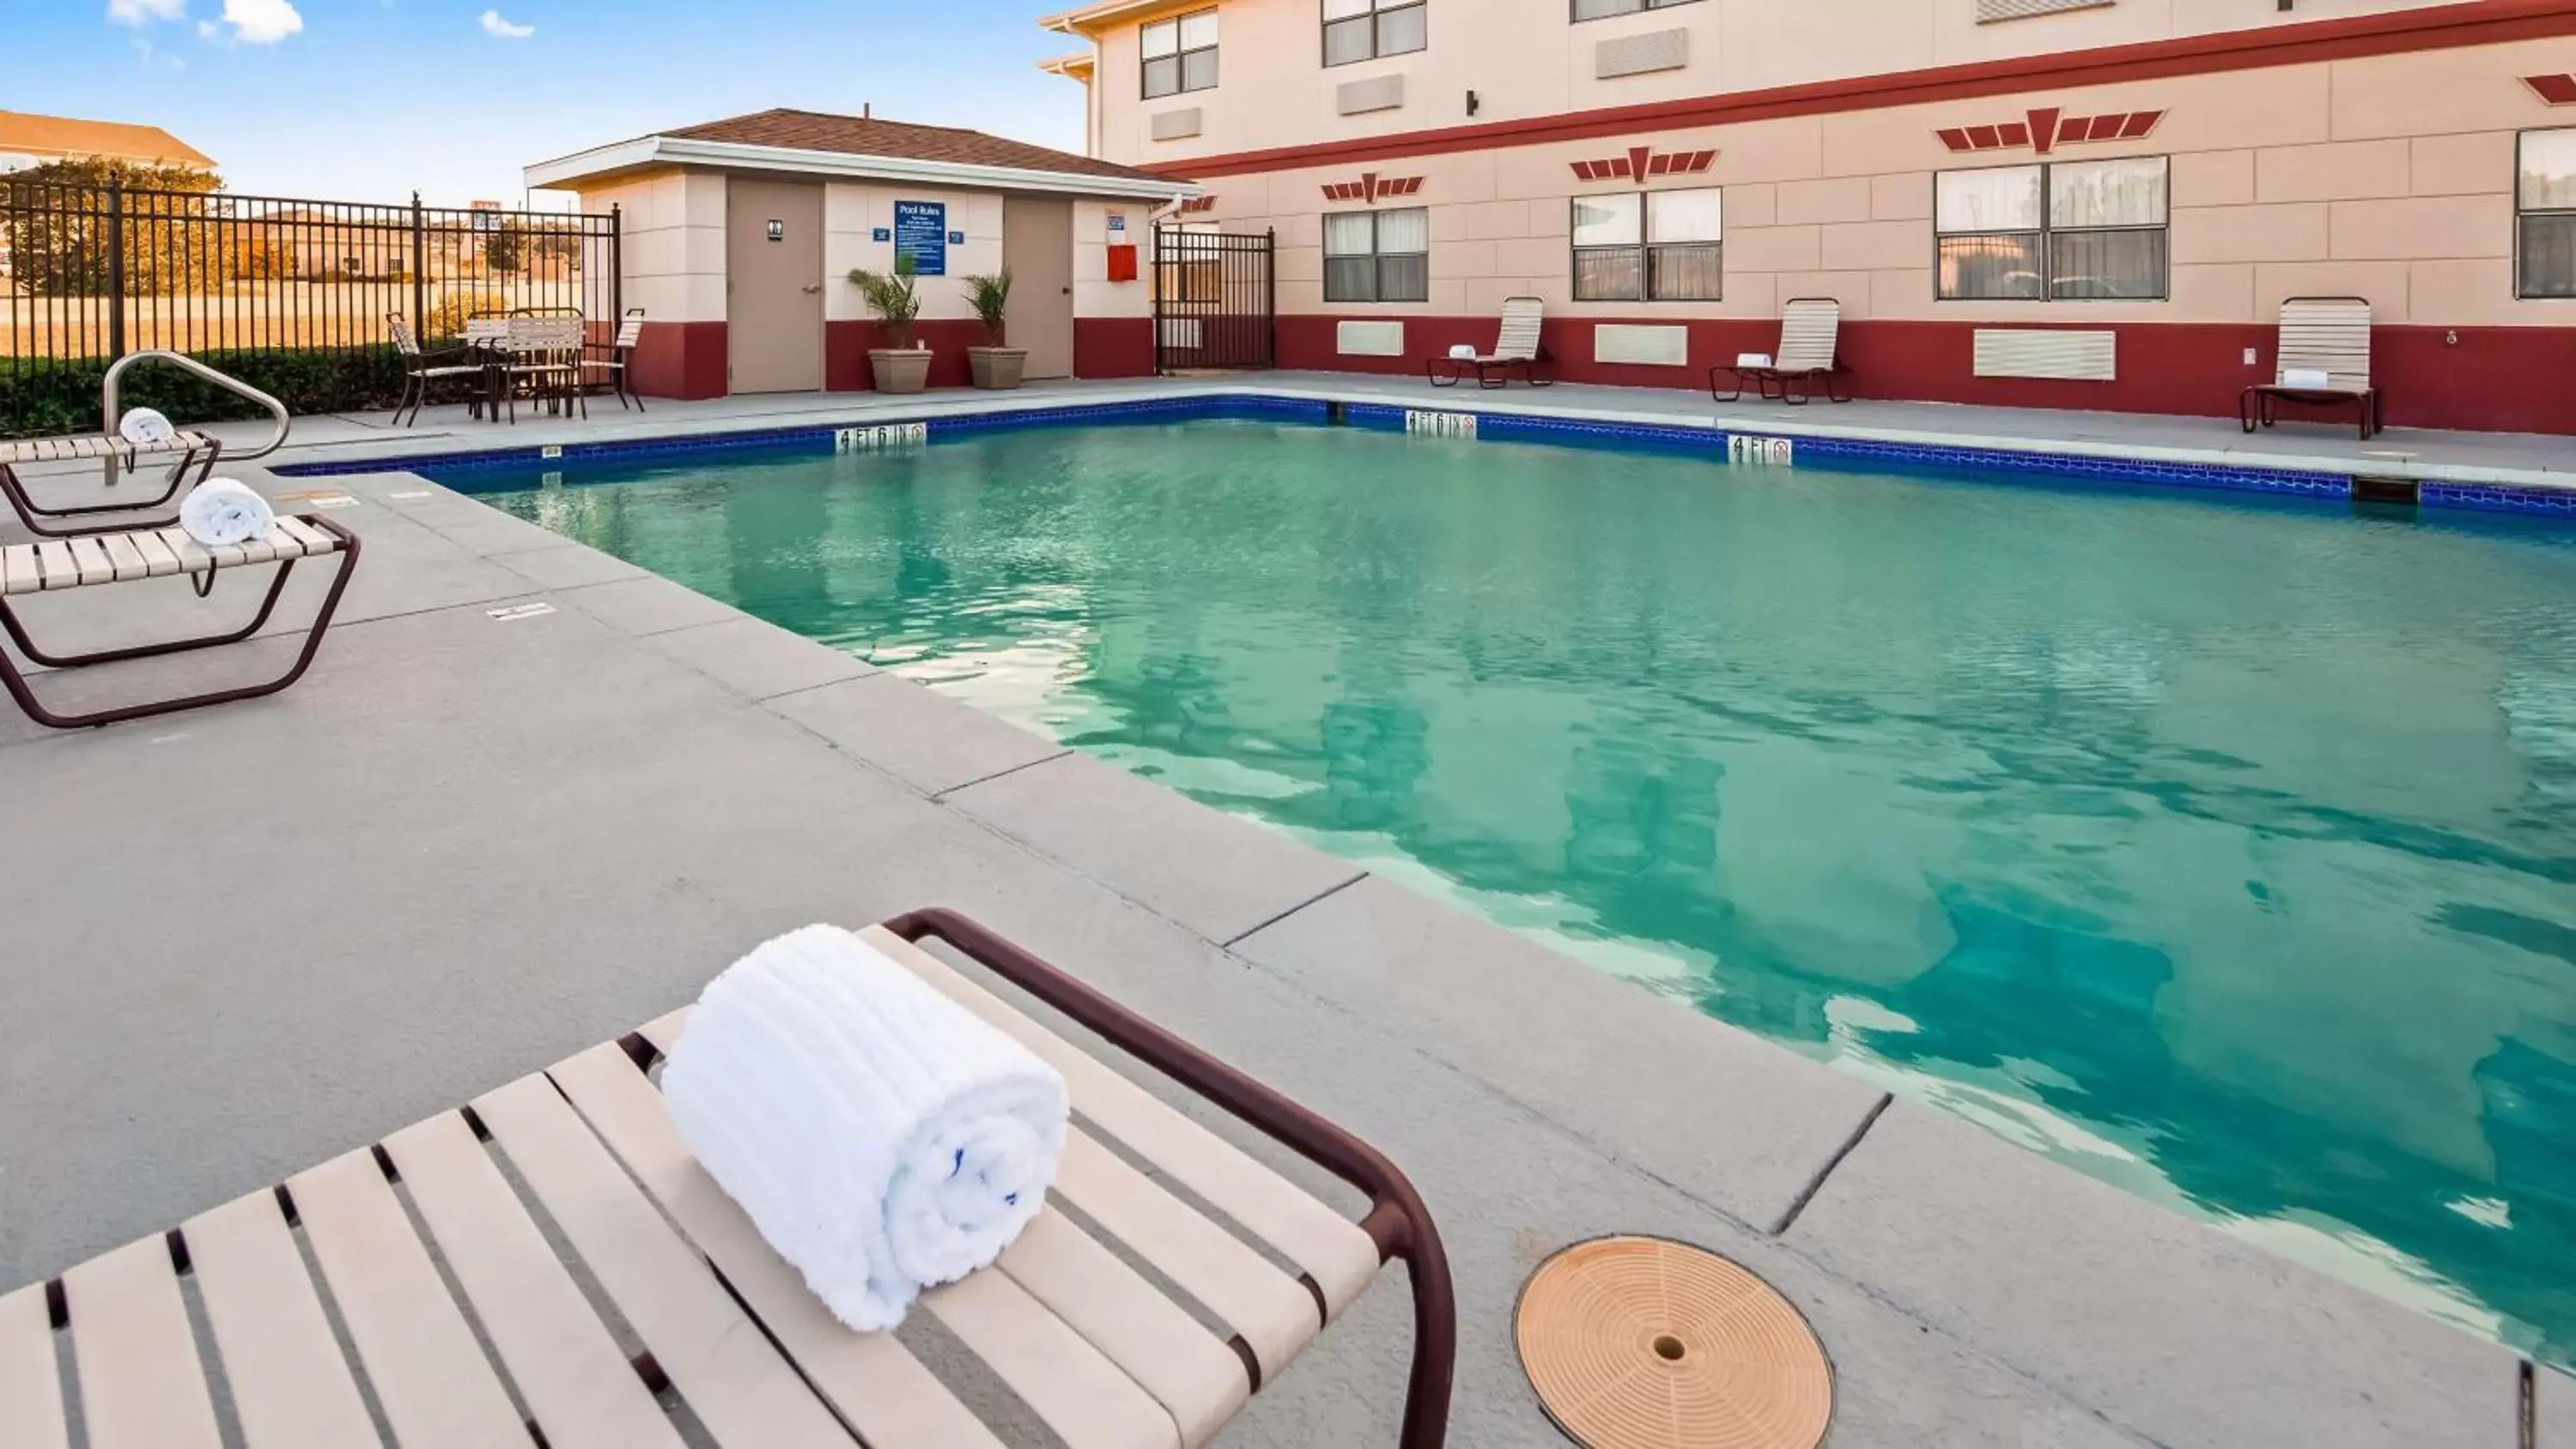 On site, Swimming Pool in Best Western Inn and Suites Copperas Cove